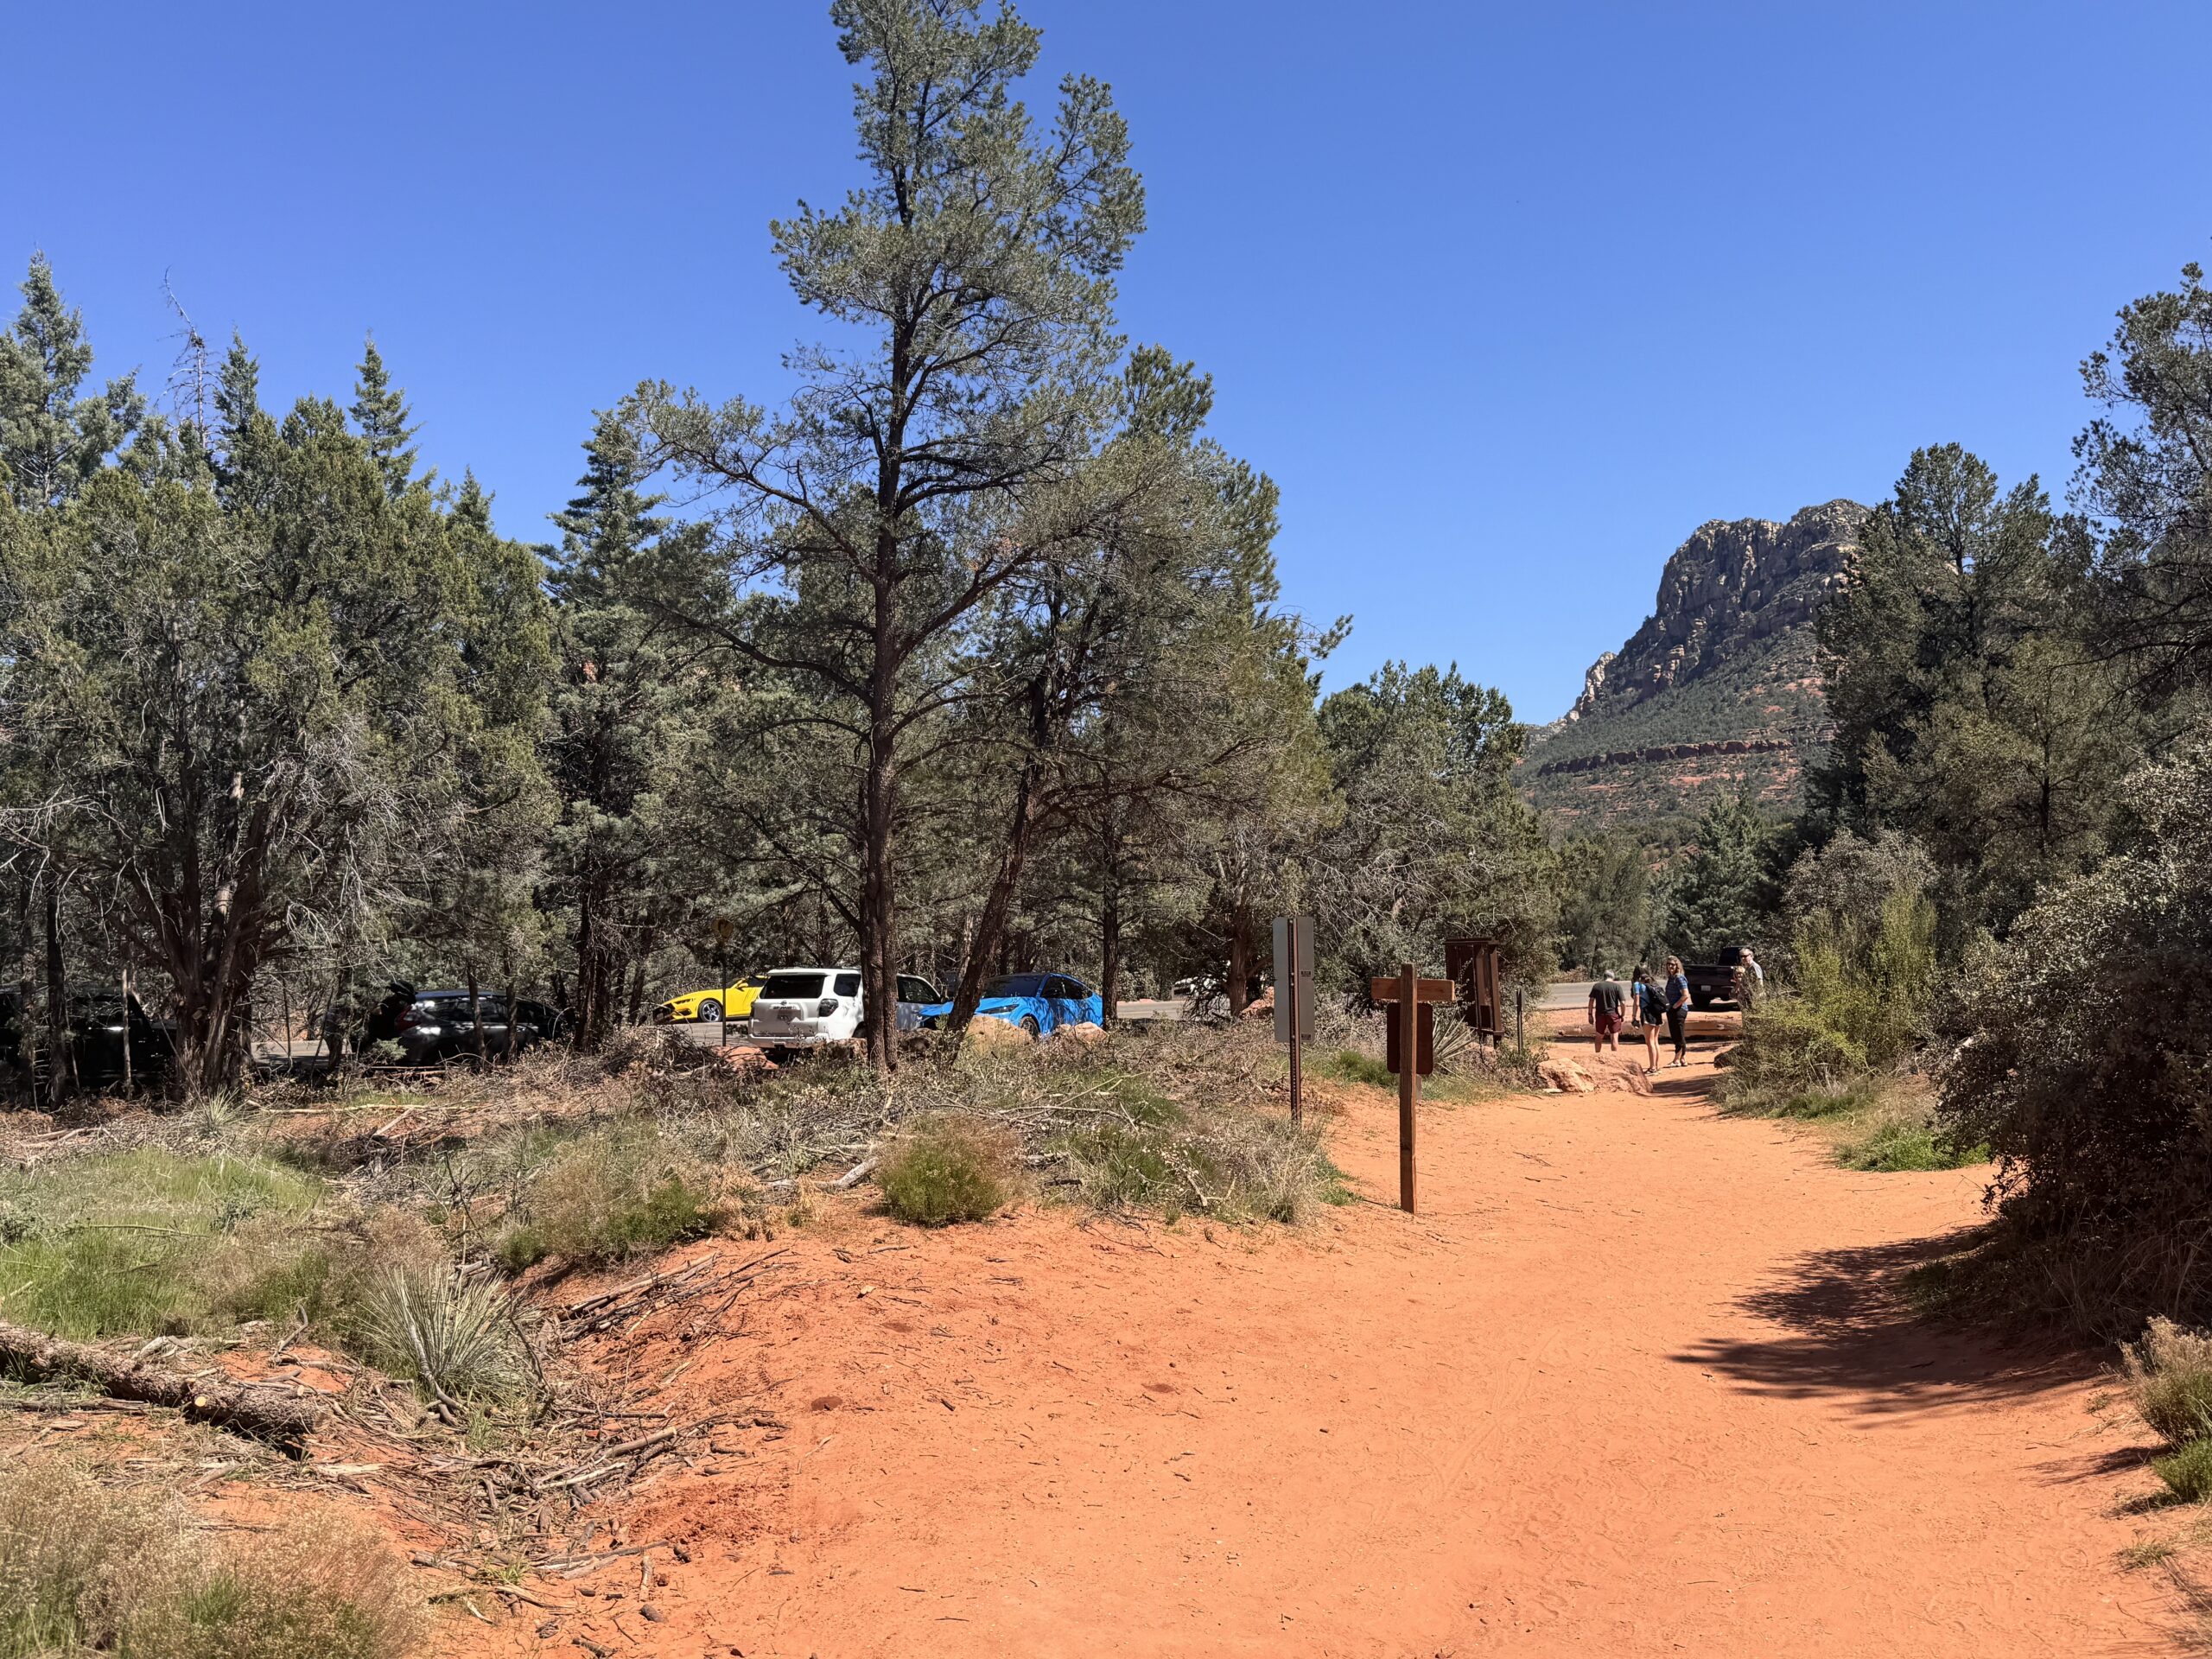 cars parked in sedona near a trail